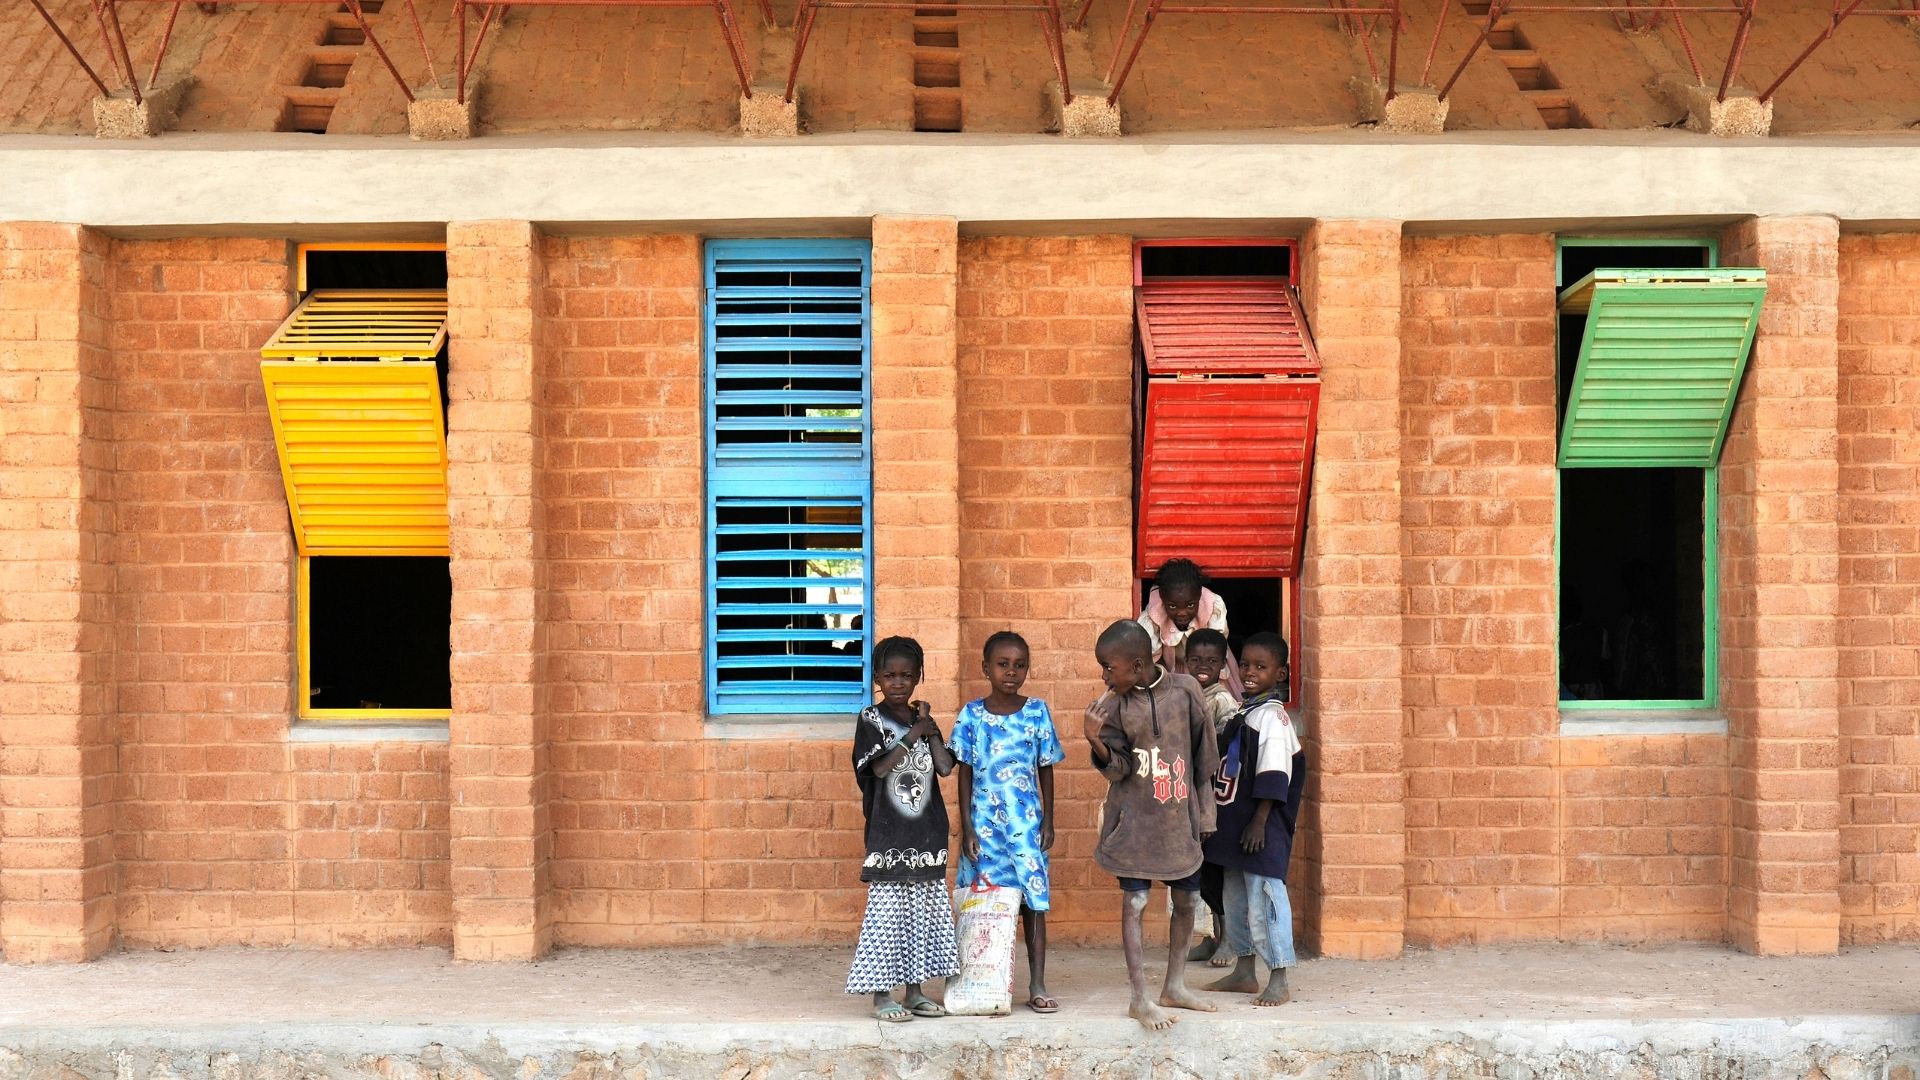 Local design is saving the environment in West Africa